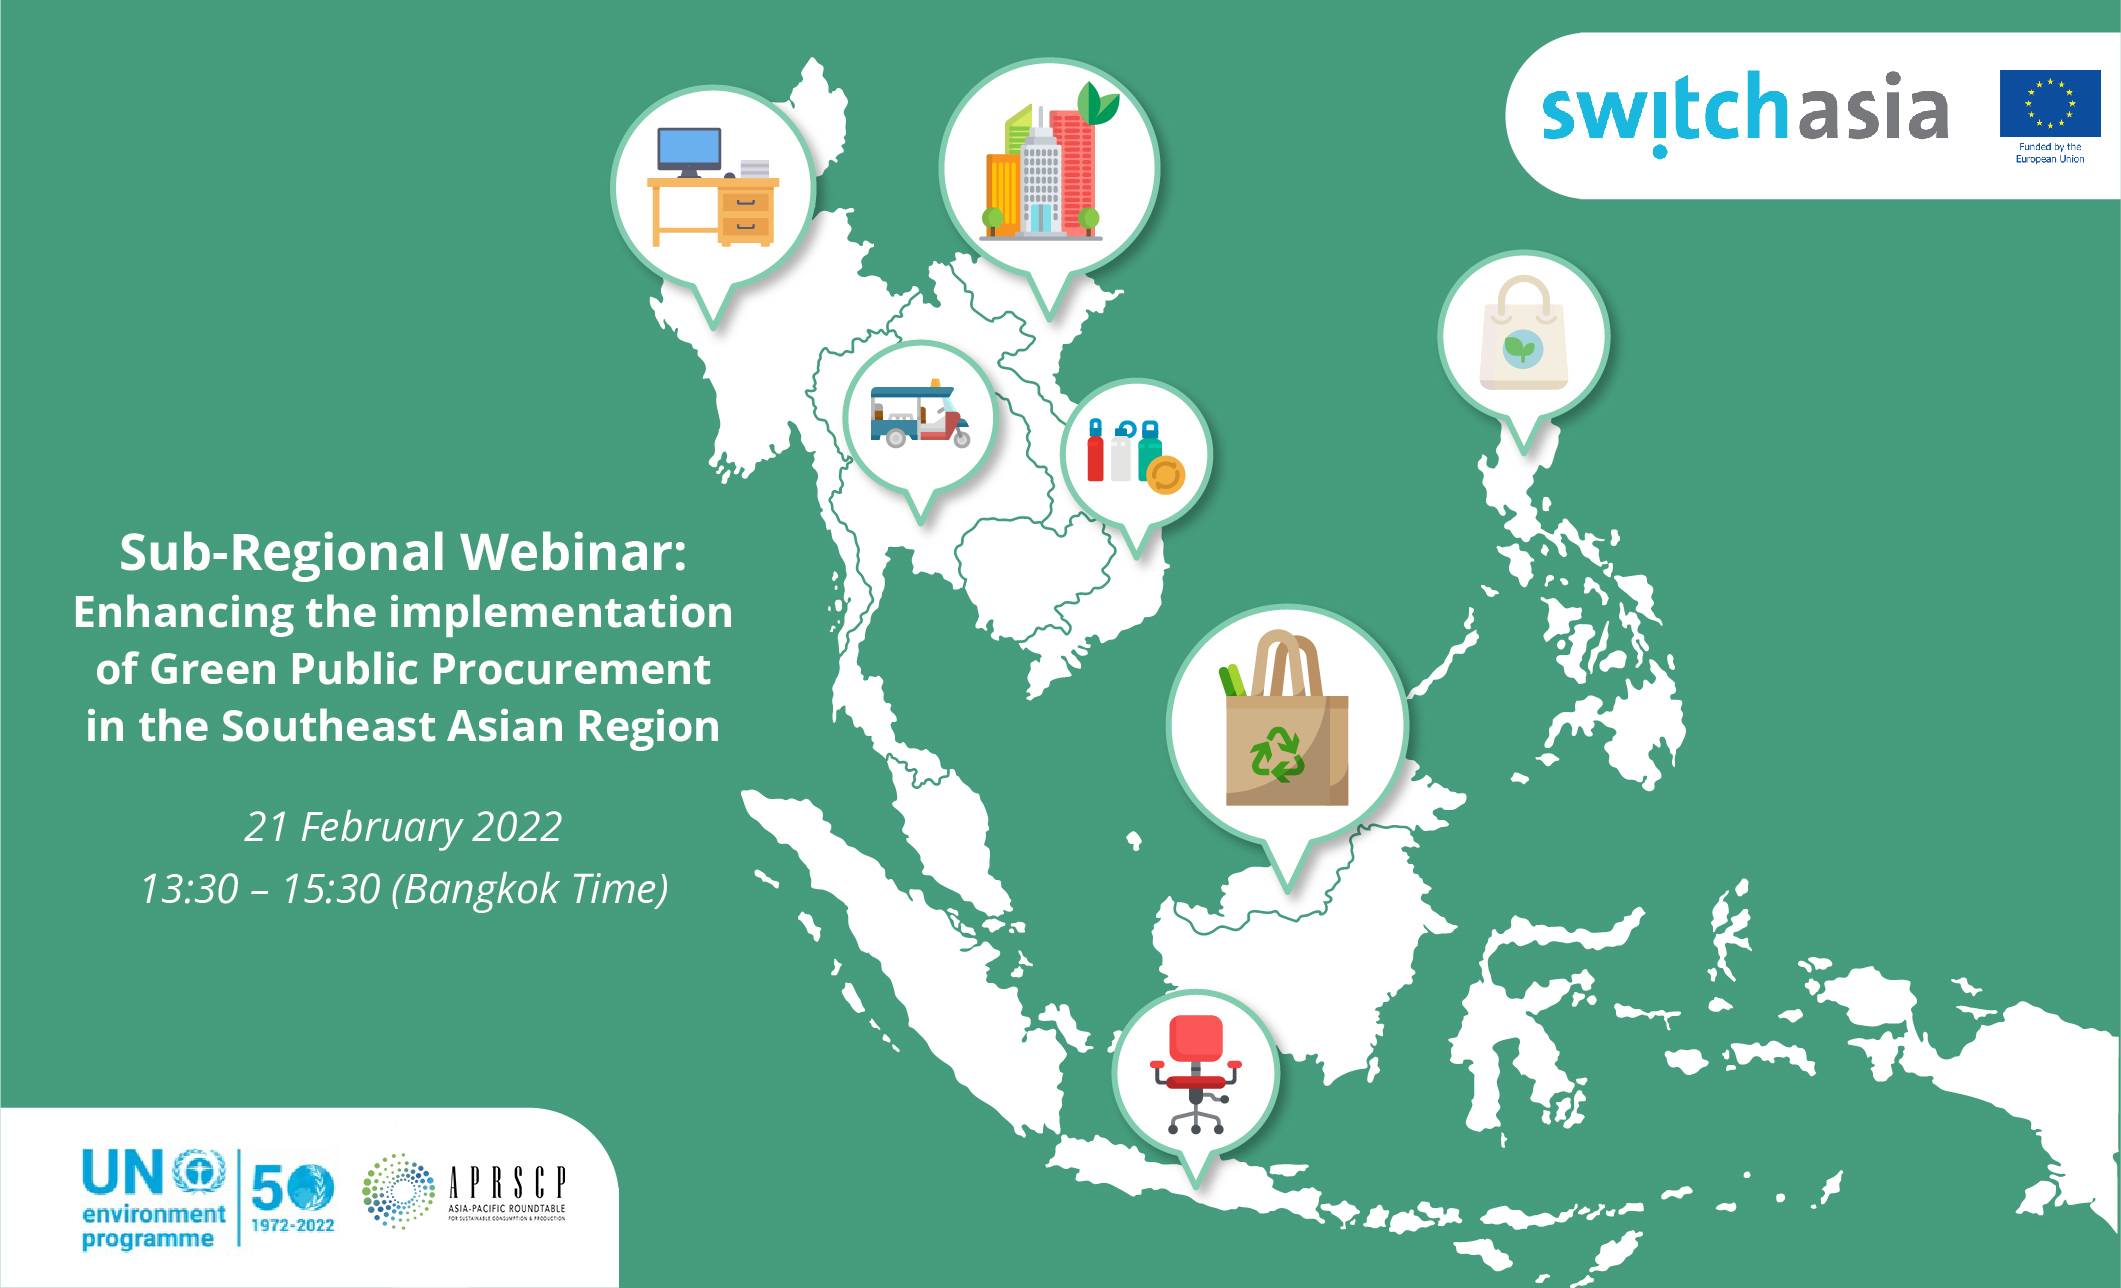 Enhancing the implementation of Green Public Procurement in the Southeast Asian Region